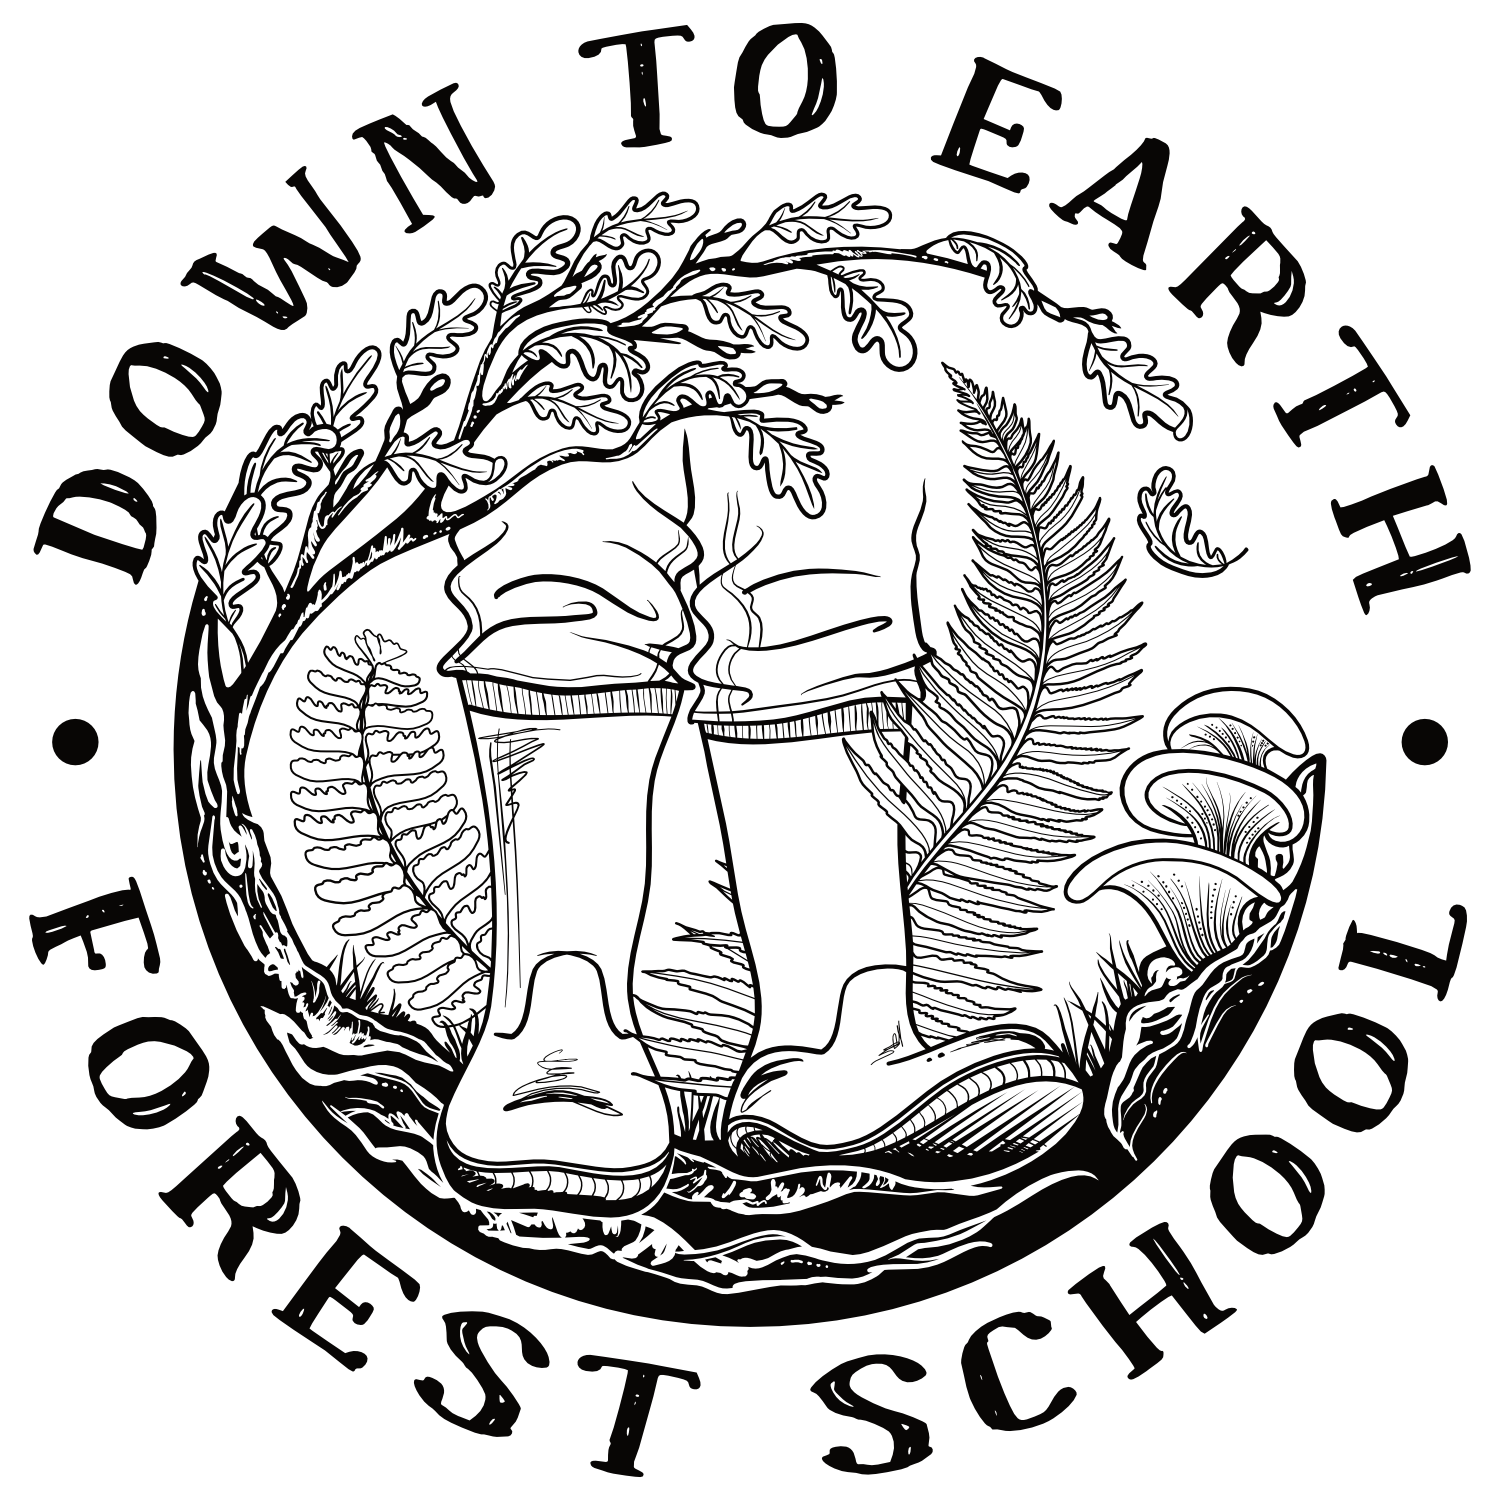 Down to Earth Forest School